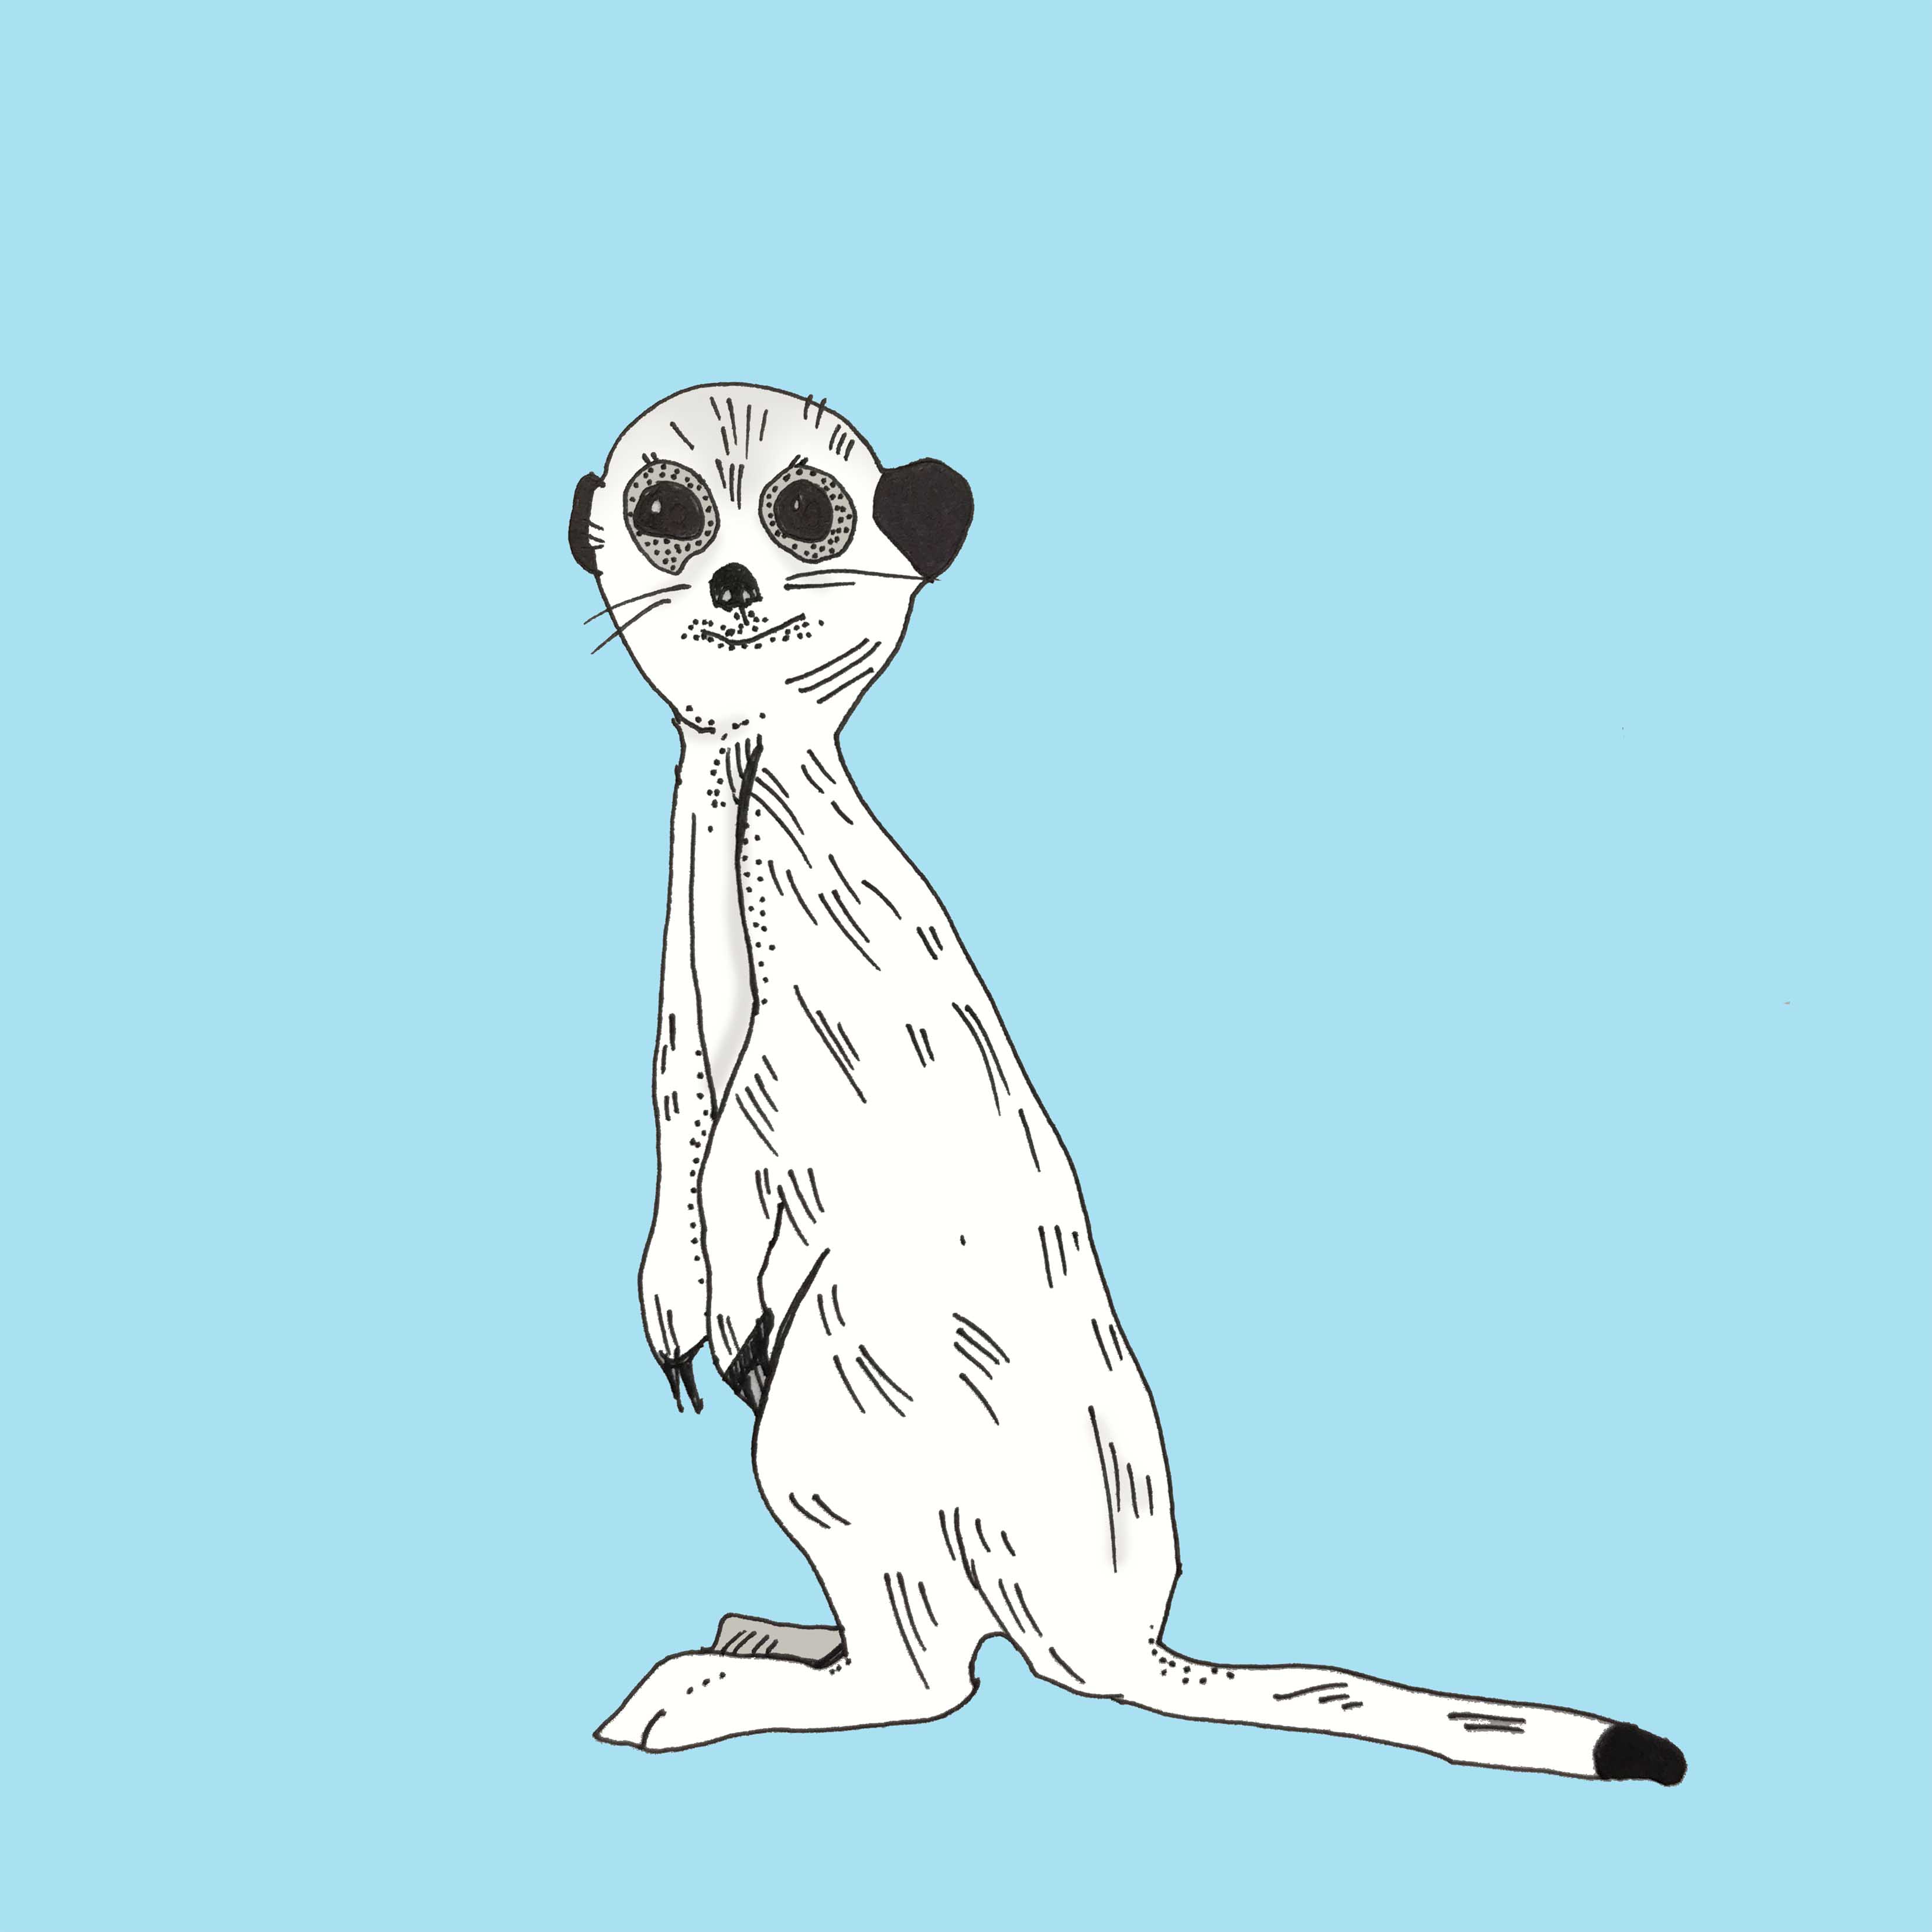 art every day number 194 meerkat animal illustrated